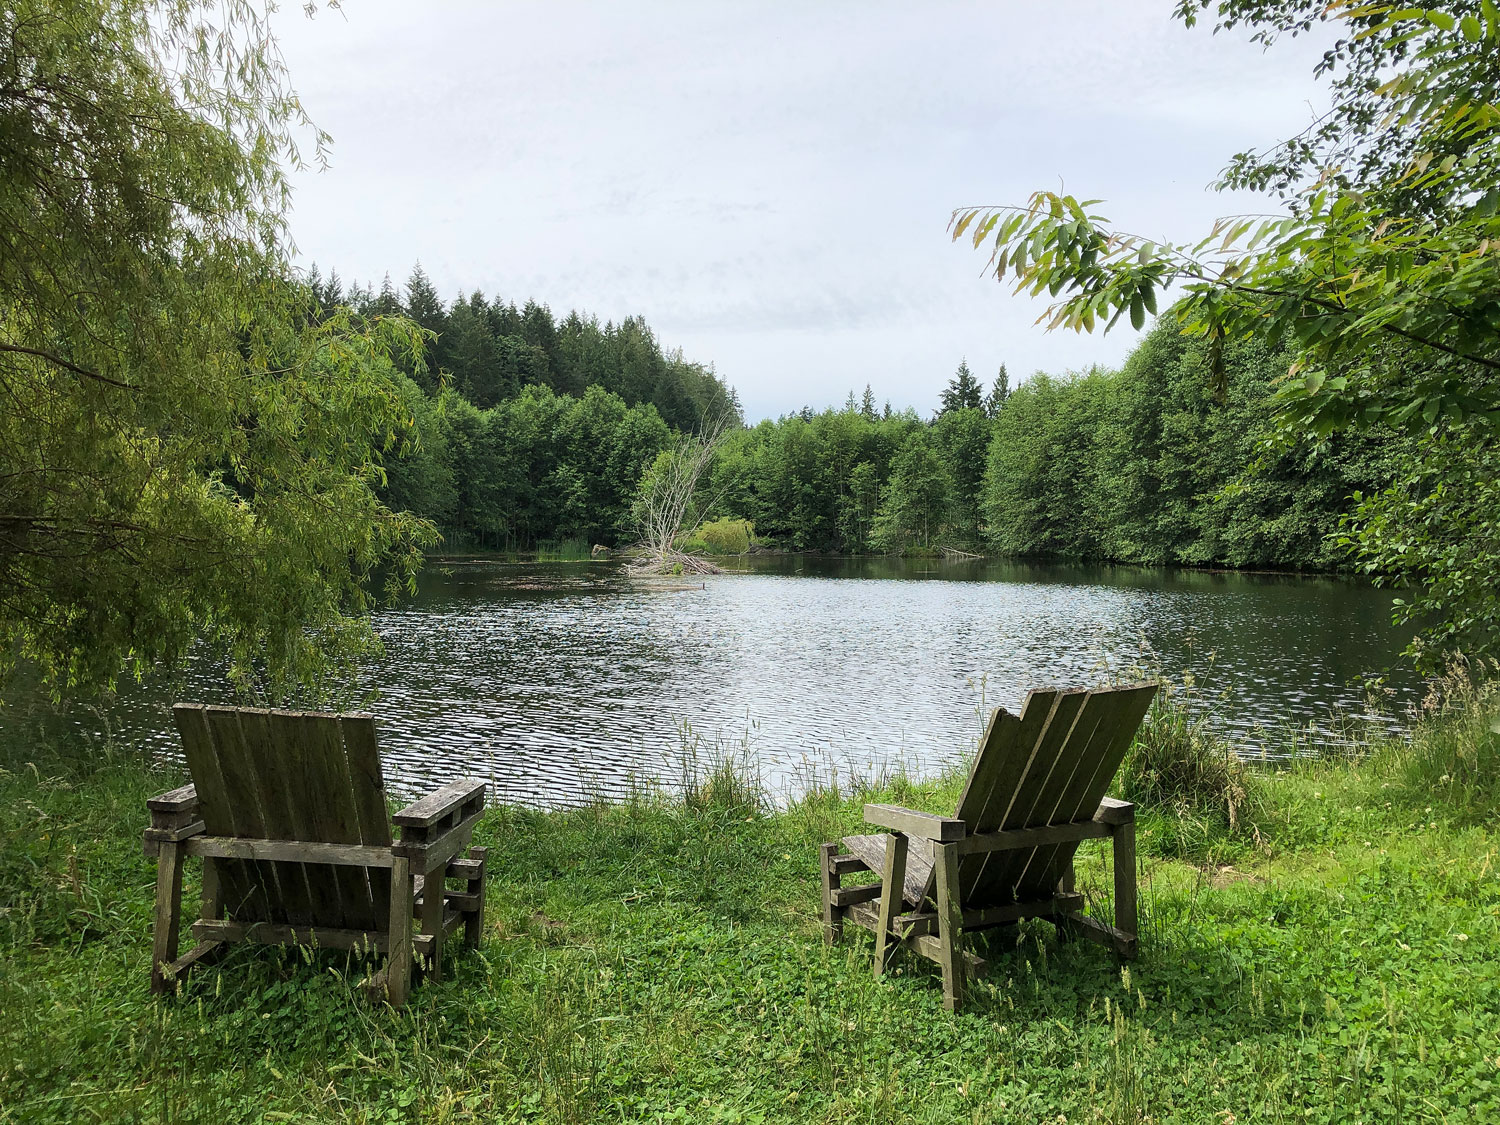 Photo shows a large pond surrounded by trees. Two adirondack chairs sit in the foreground.